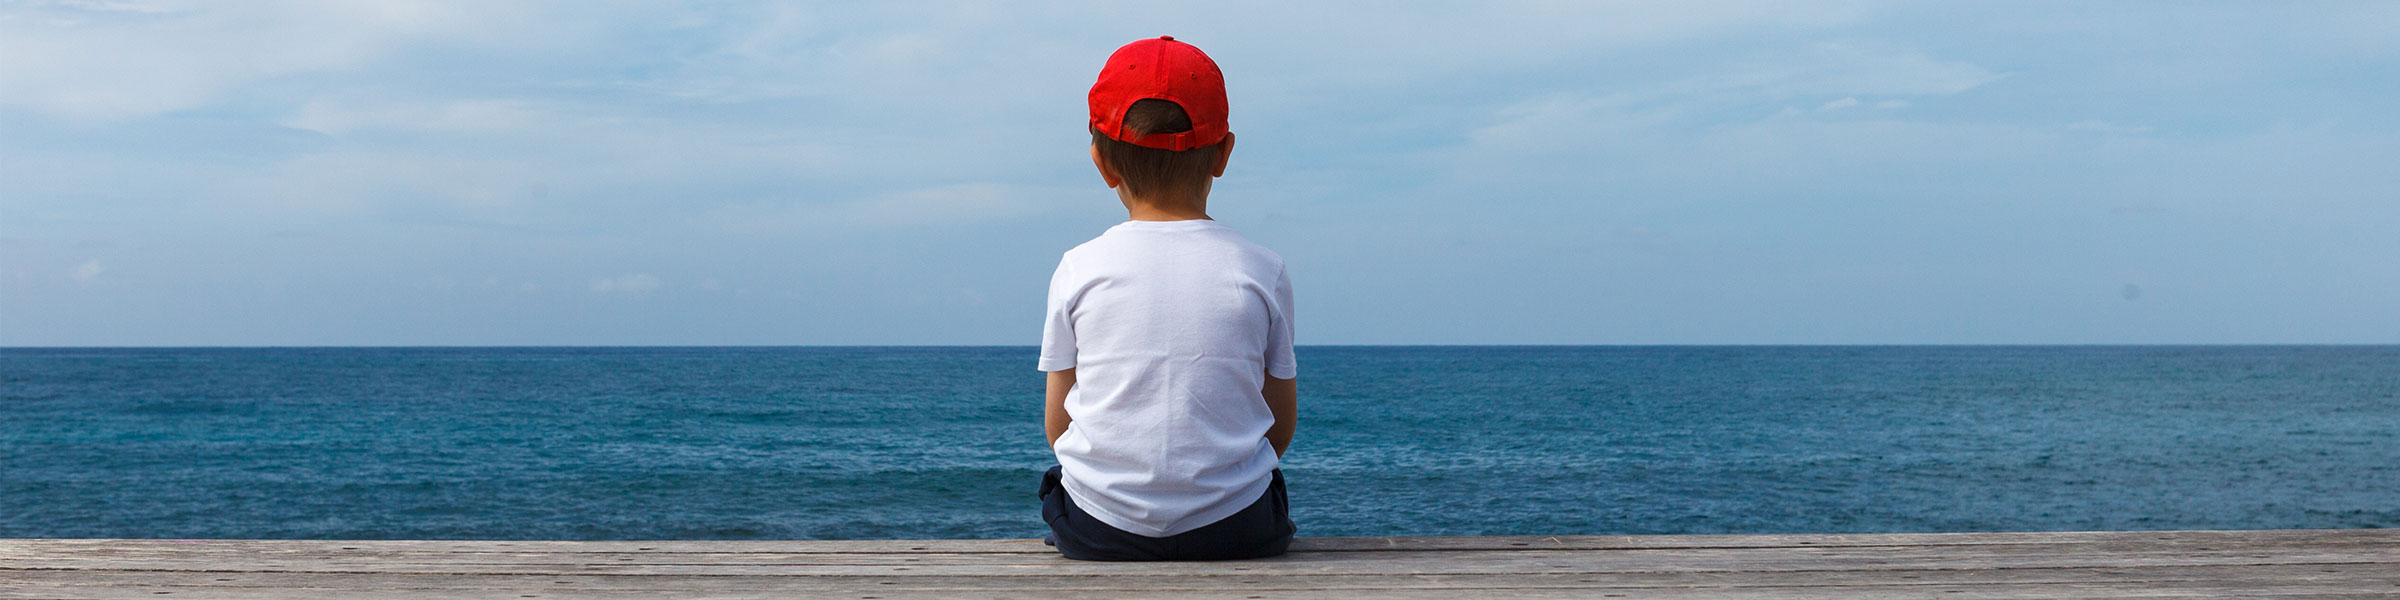 Child looking out over ocean